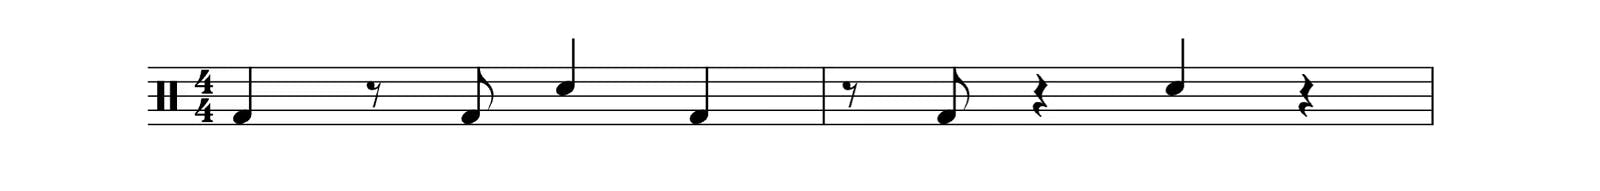 A simplified notation of the groove for the snare and kick